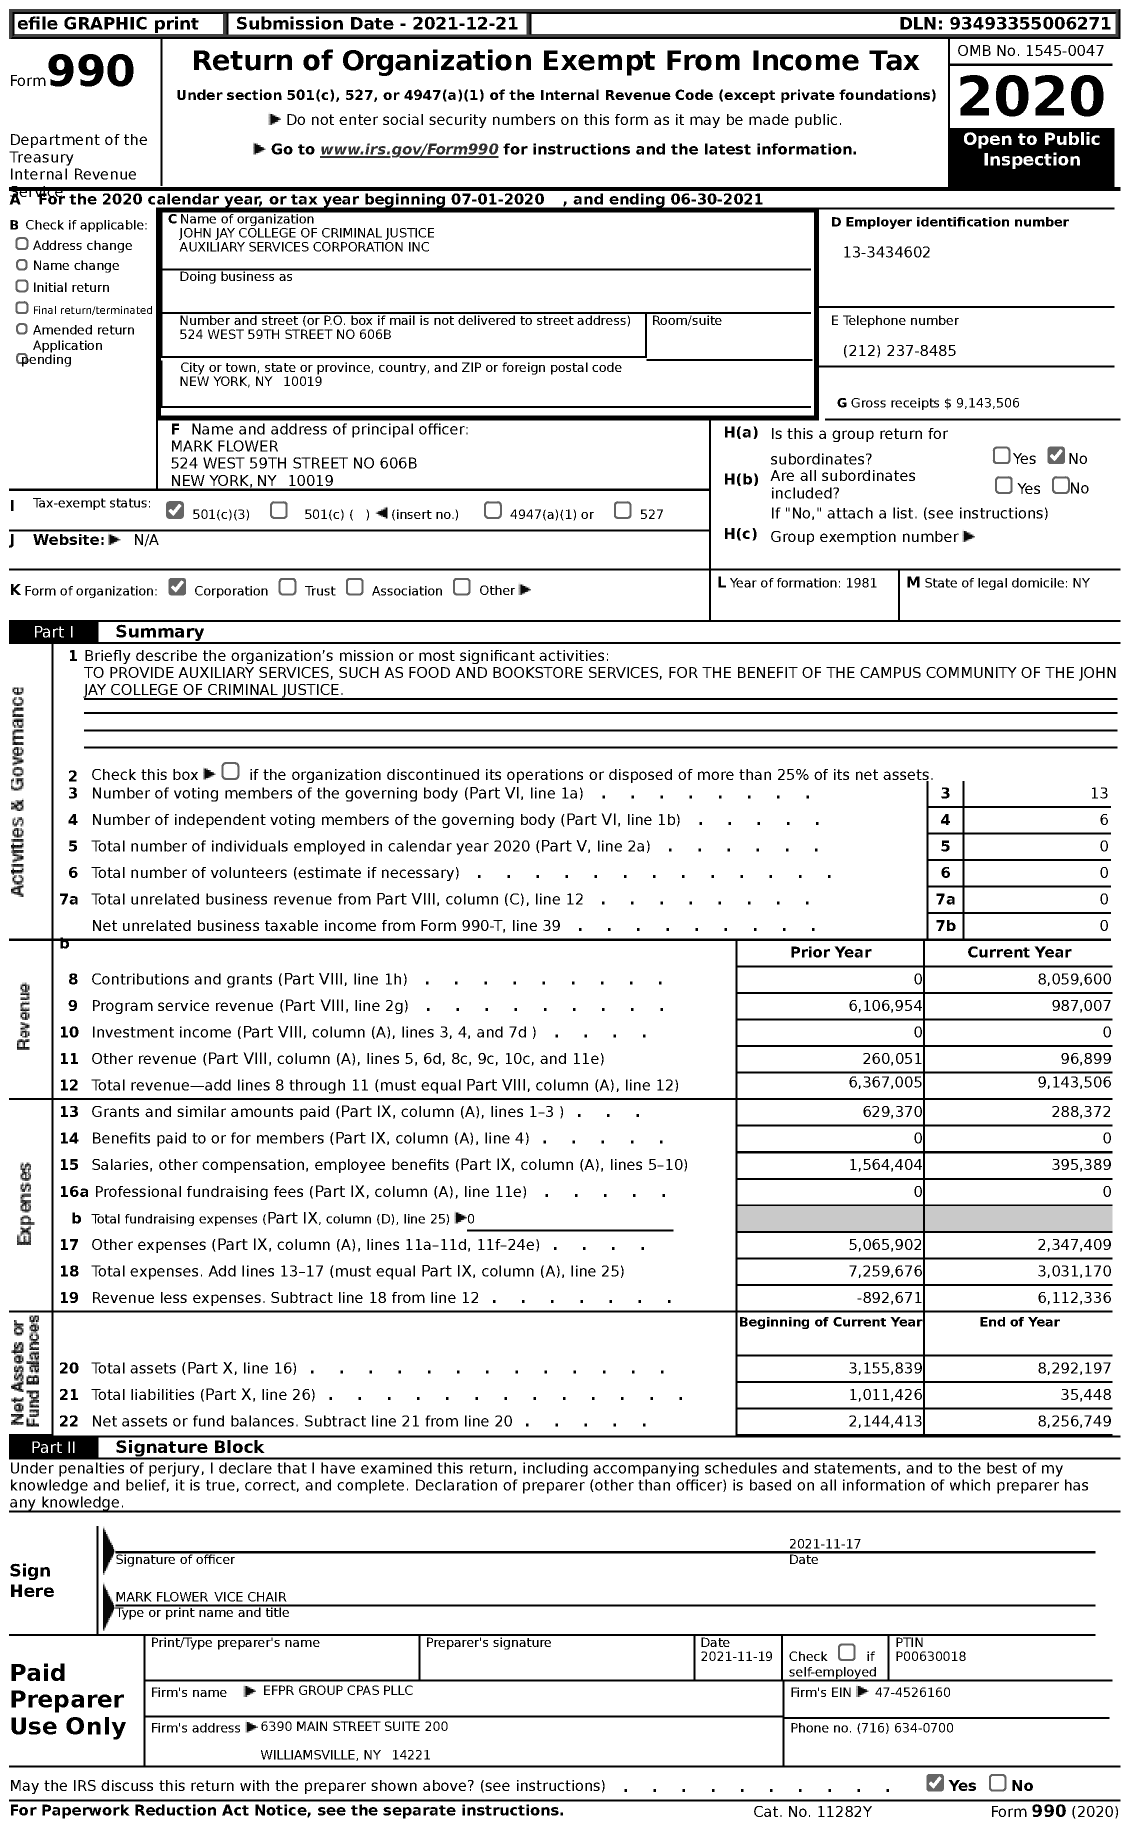 Image of first page of 2020 Form 990 for John Jay College of Criminal Justice Auxiliary Services Corporation